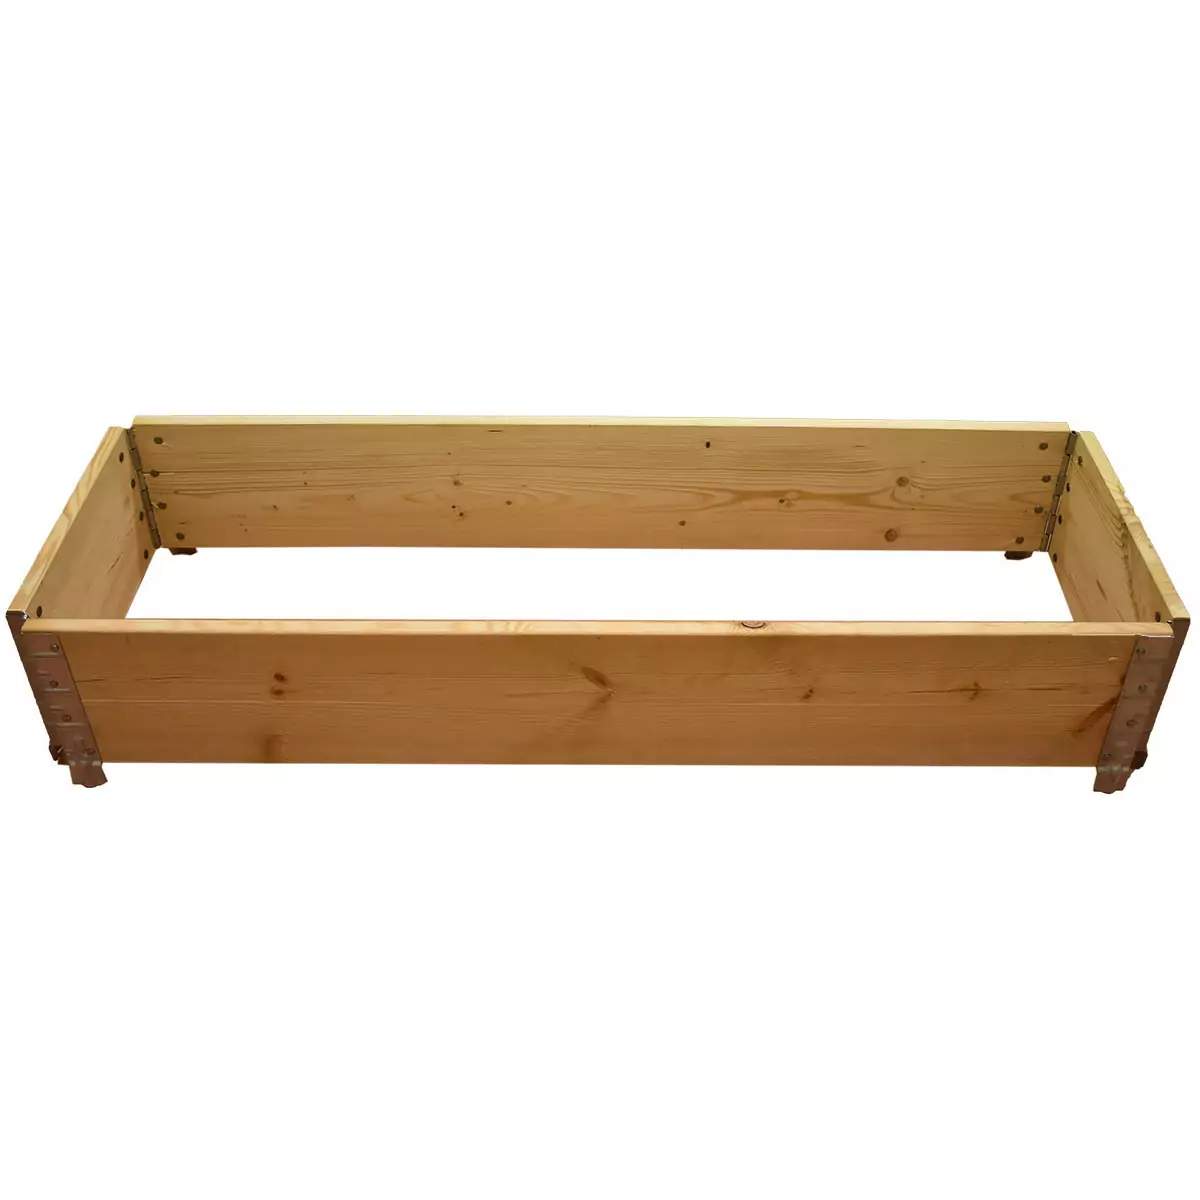 Square vegetable garden in natural wood 1200 x 1200mm